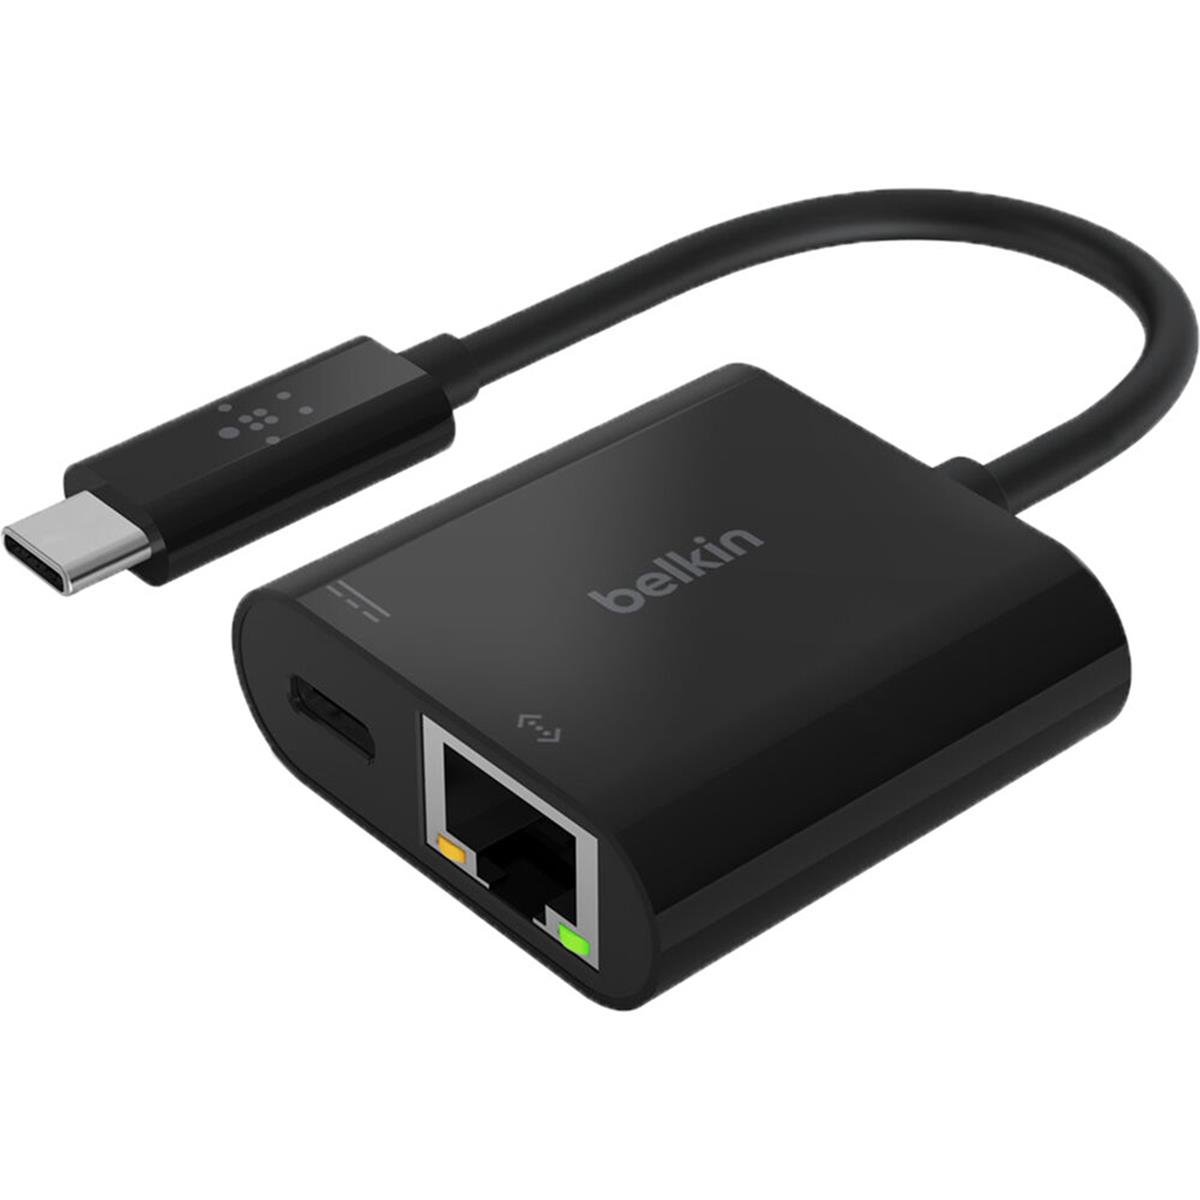 Image of Belkin USB Type-C to Gigabit Ethernet Adapter with Power Delivery